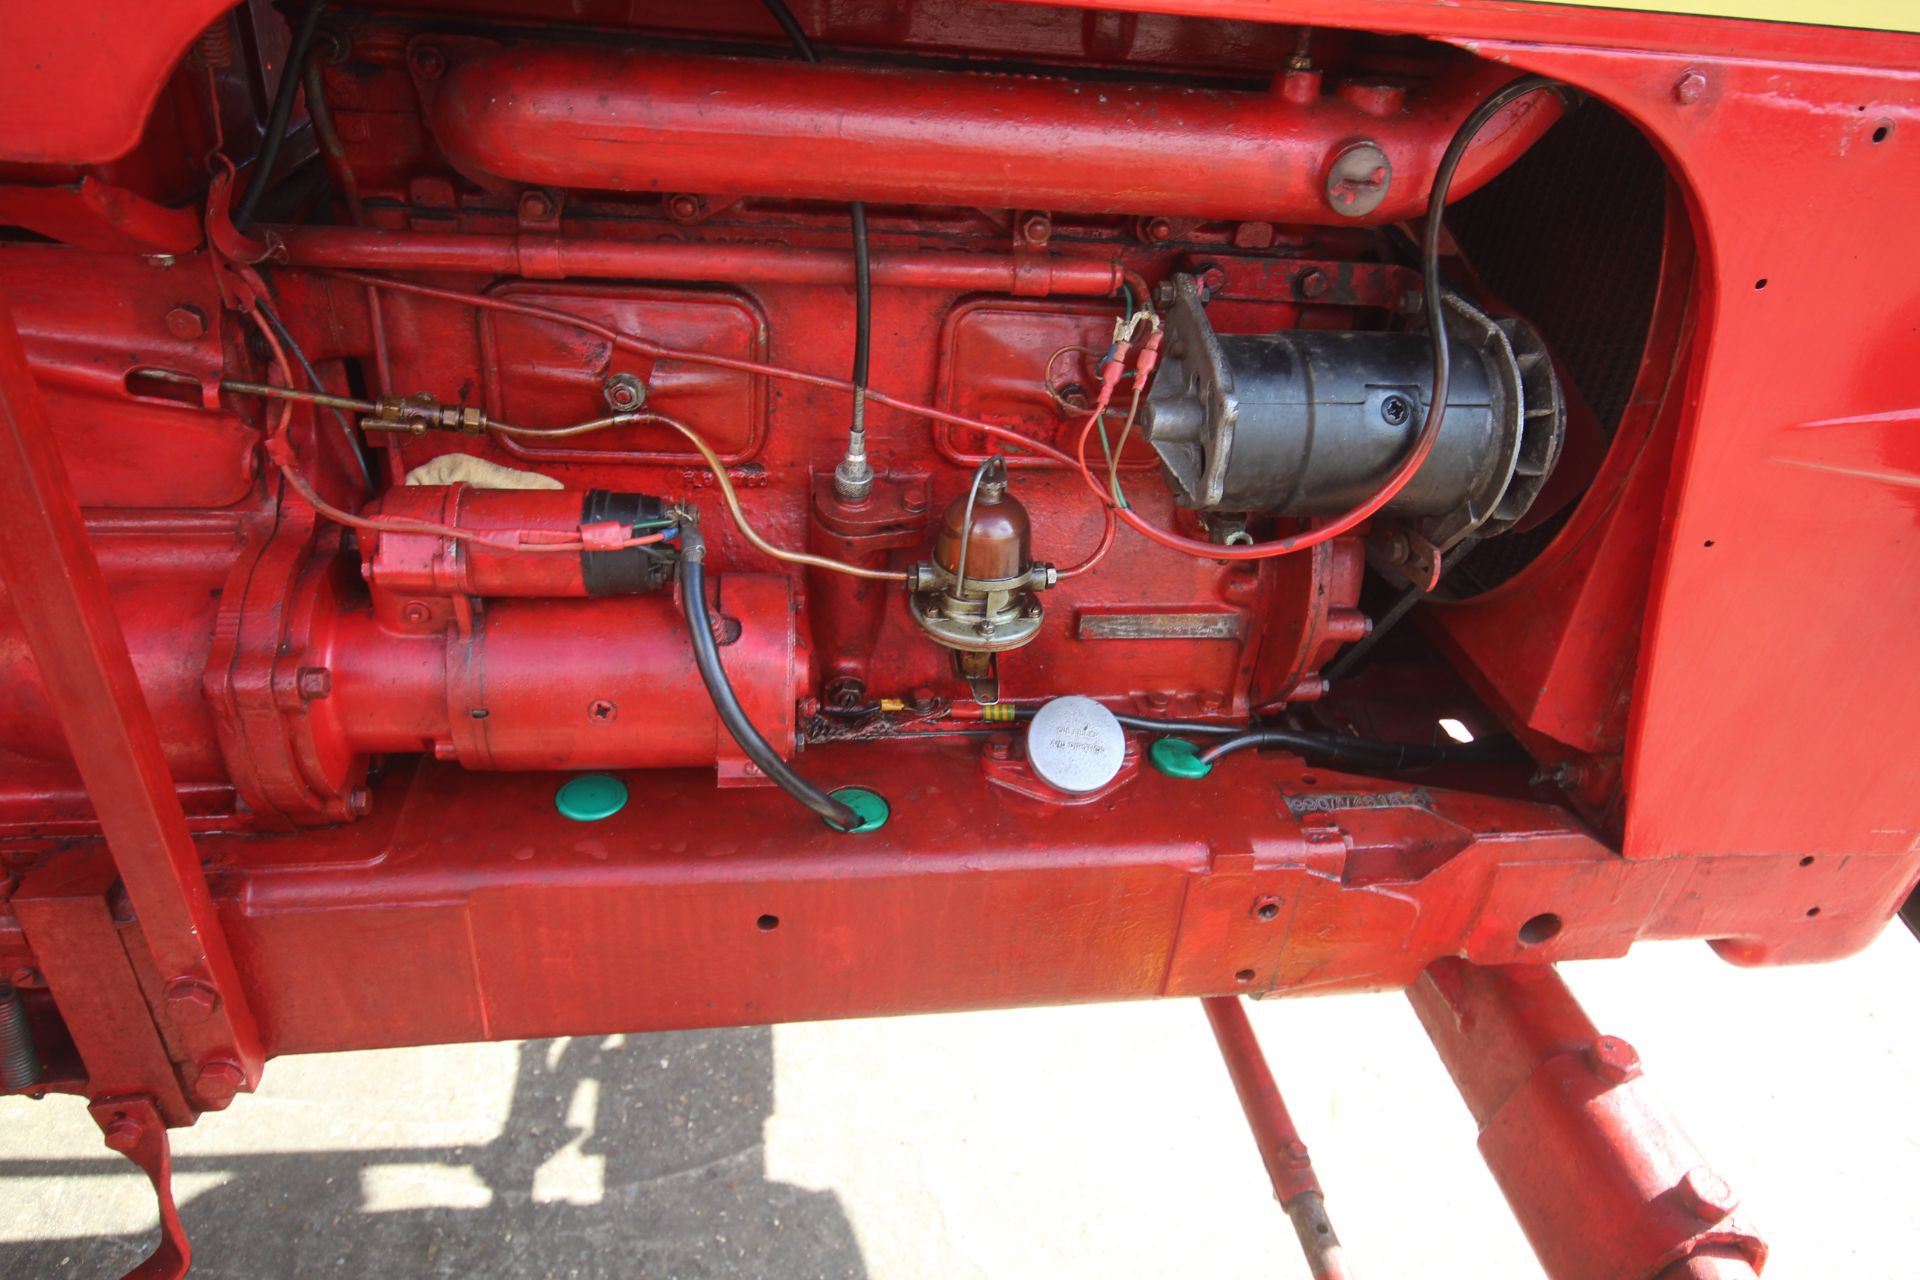 David Brown 990 Implematic live drive 2WD tractor. Registration CNO 117B. Date of first registration - Image 36 of 43